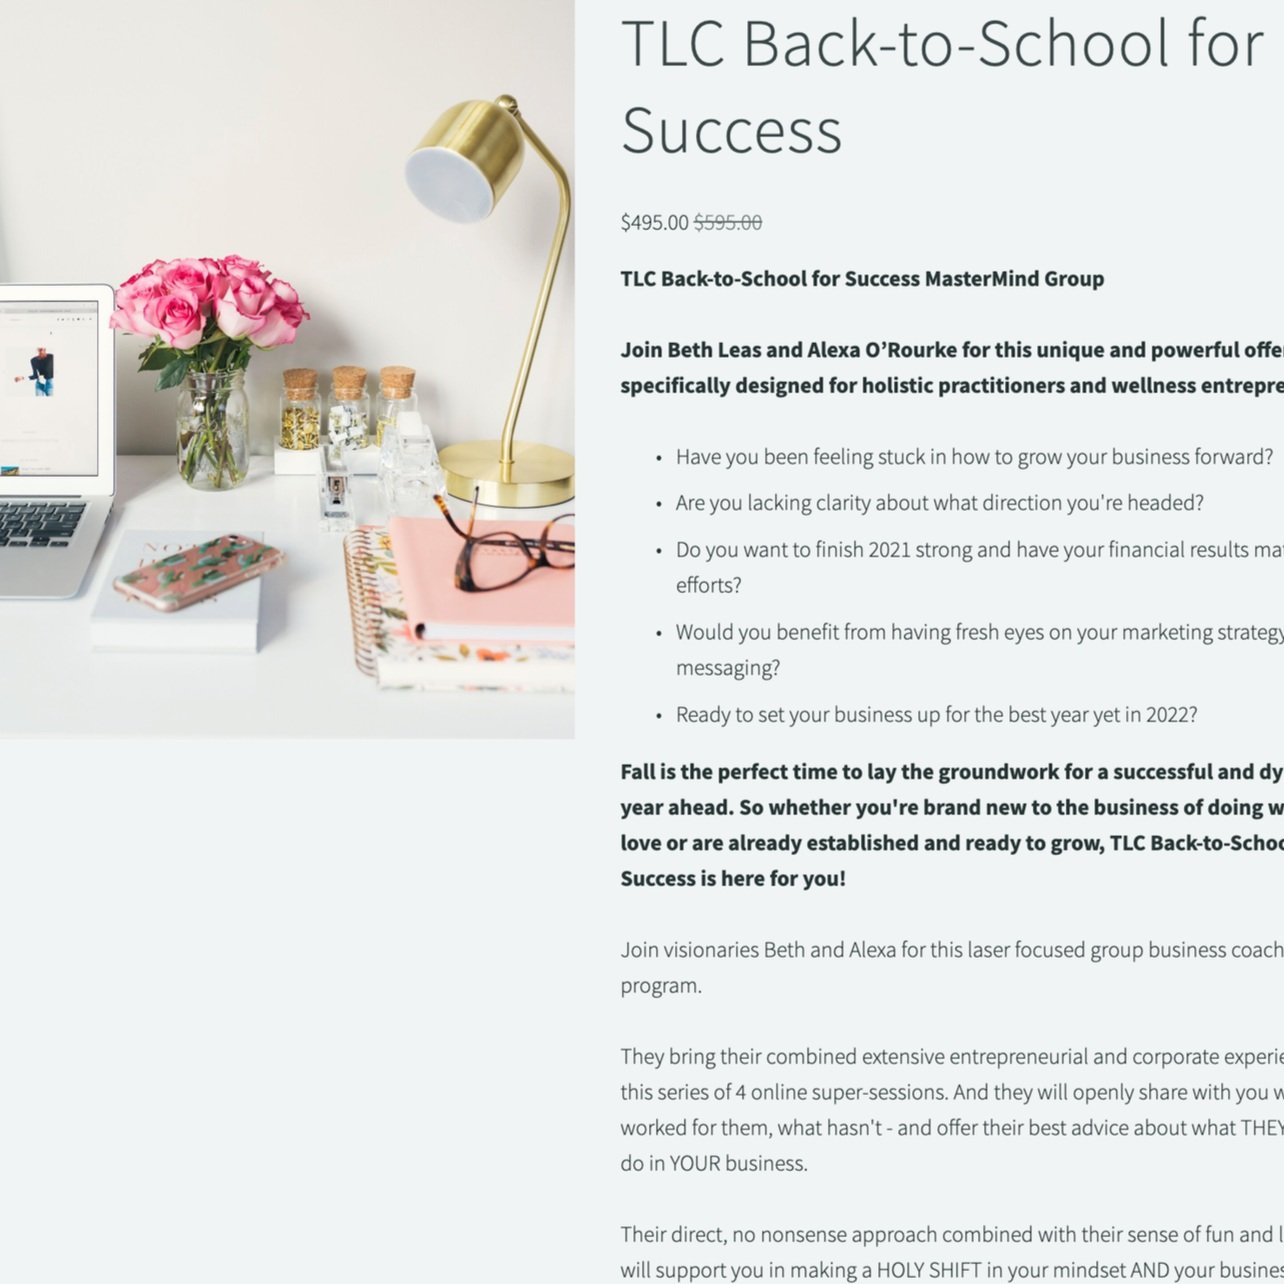 TLC Back-to-School for Success MasterMind Group: Join Beth Leas and Alexa O’Rourke for this unique and powerful offering - specifically designed for holistic practitioners and wellness entrepre (Copy)